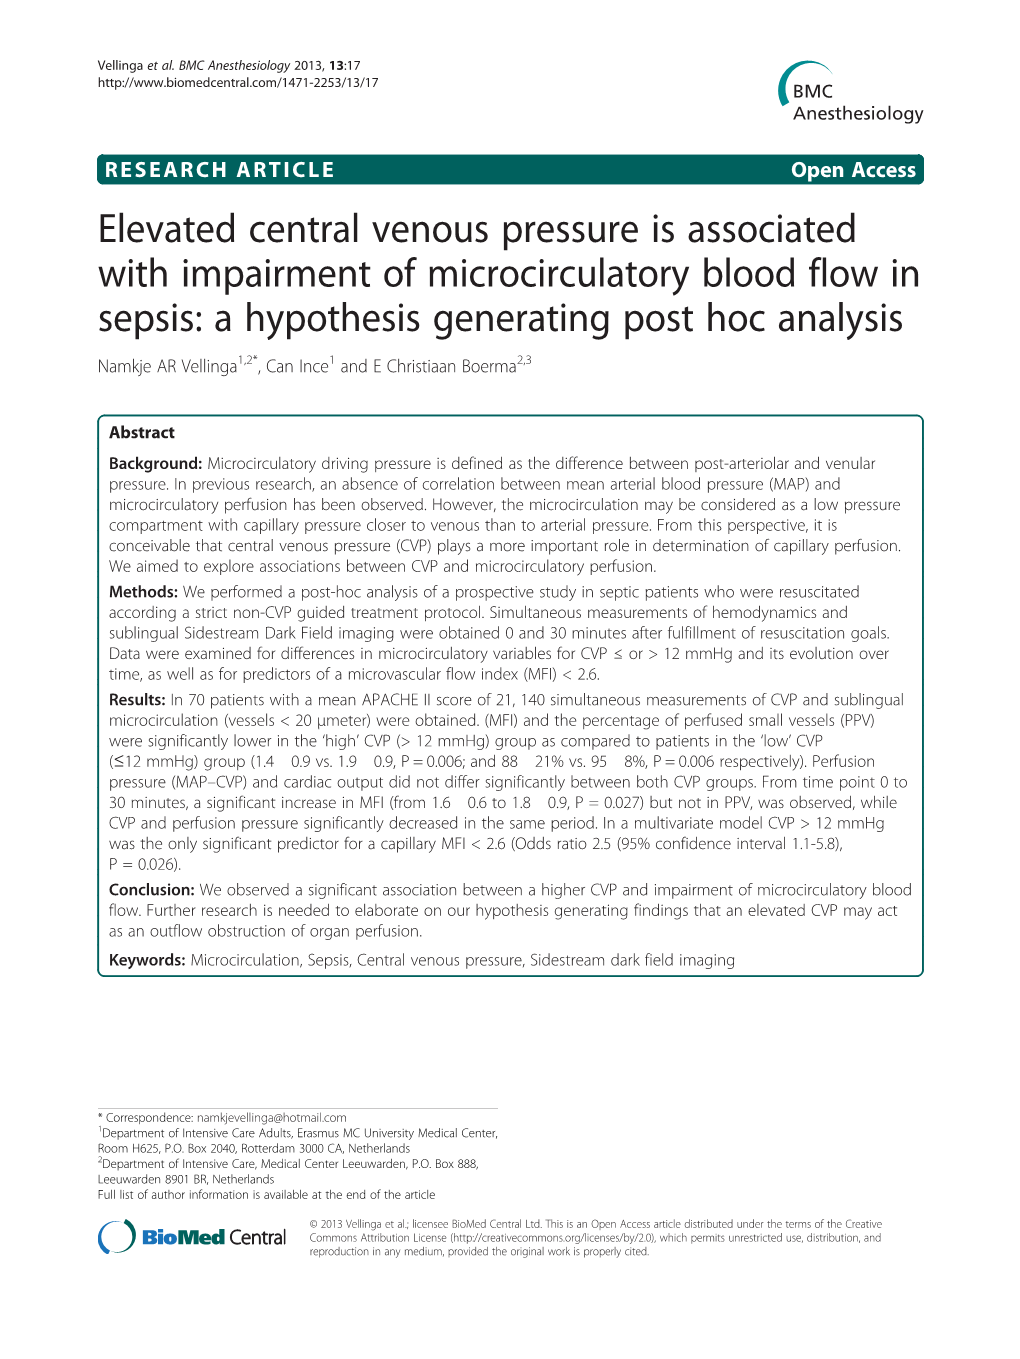 Elevated Central Venous Pressure Is Associated with Impairment of Microcirculatory Blood Flow in Sepsis: a Hypothesis Generating